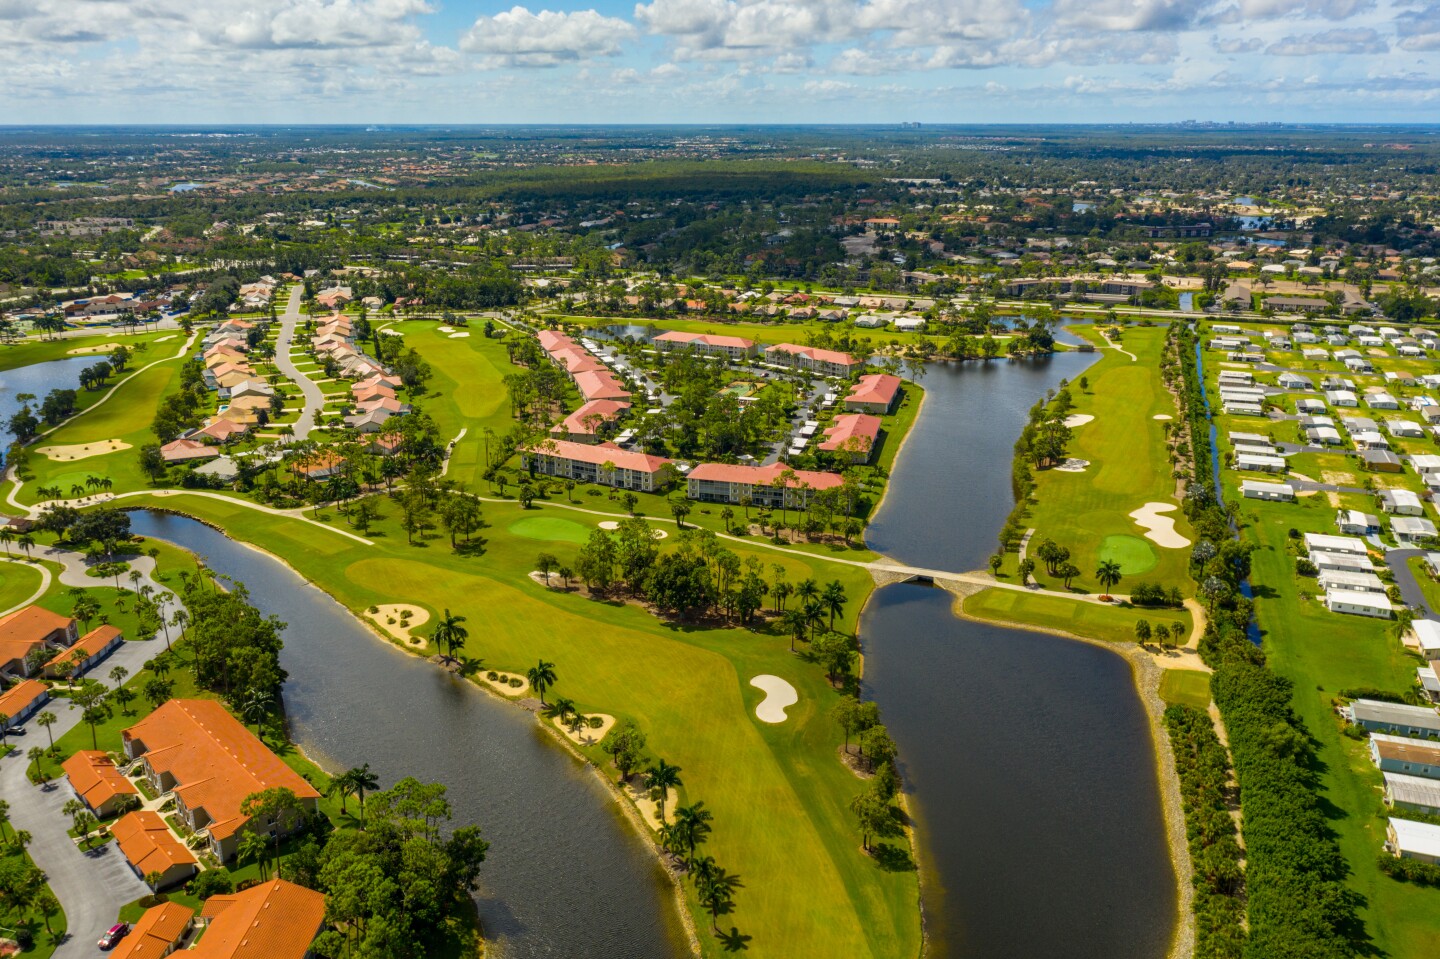 <h2>3. Naples</h2> <ul>   <li><b>Location:</b> Southwest Florida</li>   <li><b>Come for: </b>world-class golf courses and 100+ art galleries and museums</li>  </ul> <p>With over 100 galleries and museums featuring everything from Seminole and Calusa history to automobiles, Naples has plenty for art enthusiasts. Don’t miss a show at the performance venue <a class="Link" href="https://artisnaples.org/" rel="noopener">Artis-Naples</a>, affectionately known as the Phil by locals.</p> <p>Shelling is spectacular along Naples’s pearly white coast, but for some true Florida wildlife, visit the <a class="Link" href="https://conservancy.org/" rel="noopener">Conservancy of Southwest Florida</a>, a nature center with a wildlife hospital that treats injured and orphaned native animals. </p> <h3>Where to stay</h3> <ul>   <li><b>Book now: </b><a class="Link" href="https://www.innonfifth.com/" rel="noopener">Inn on Fifth</a></li>  </ul> <p>Located steps from Fifth Avenue’s palm-fringed streets and high-end boutiques, the ritzy <a class="Link" href="https://www.innonfifth.com/" rel="noopener">Inn on Fifth</a> offers lavish Club Level Suites, two restaurants, a full-service spa, and a rooftop pool and bar where you can take in Naples Bay.</p>